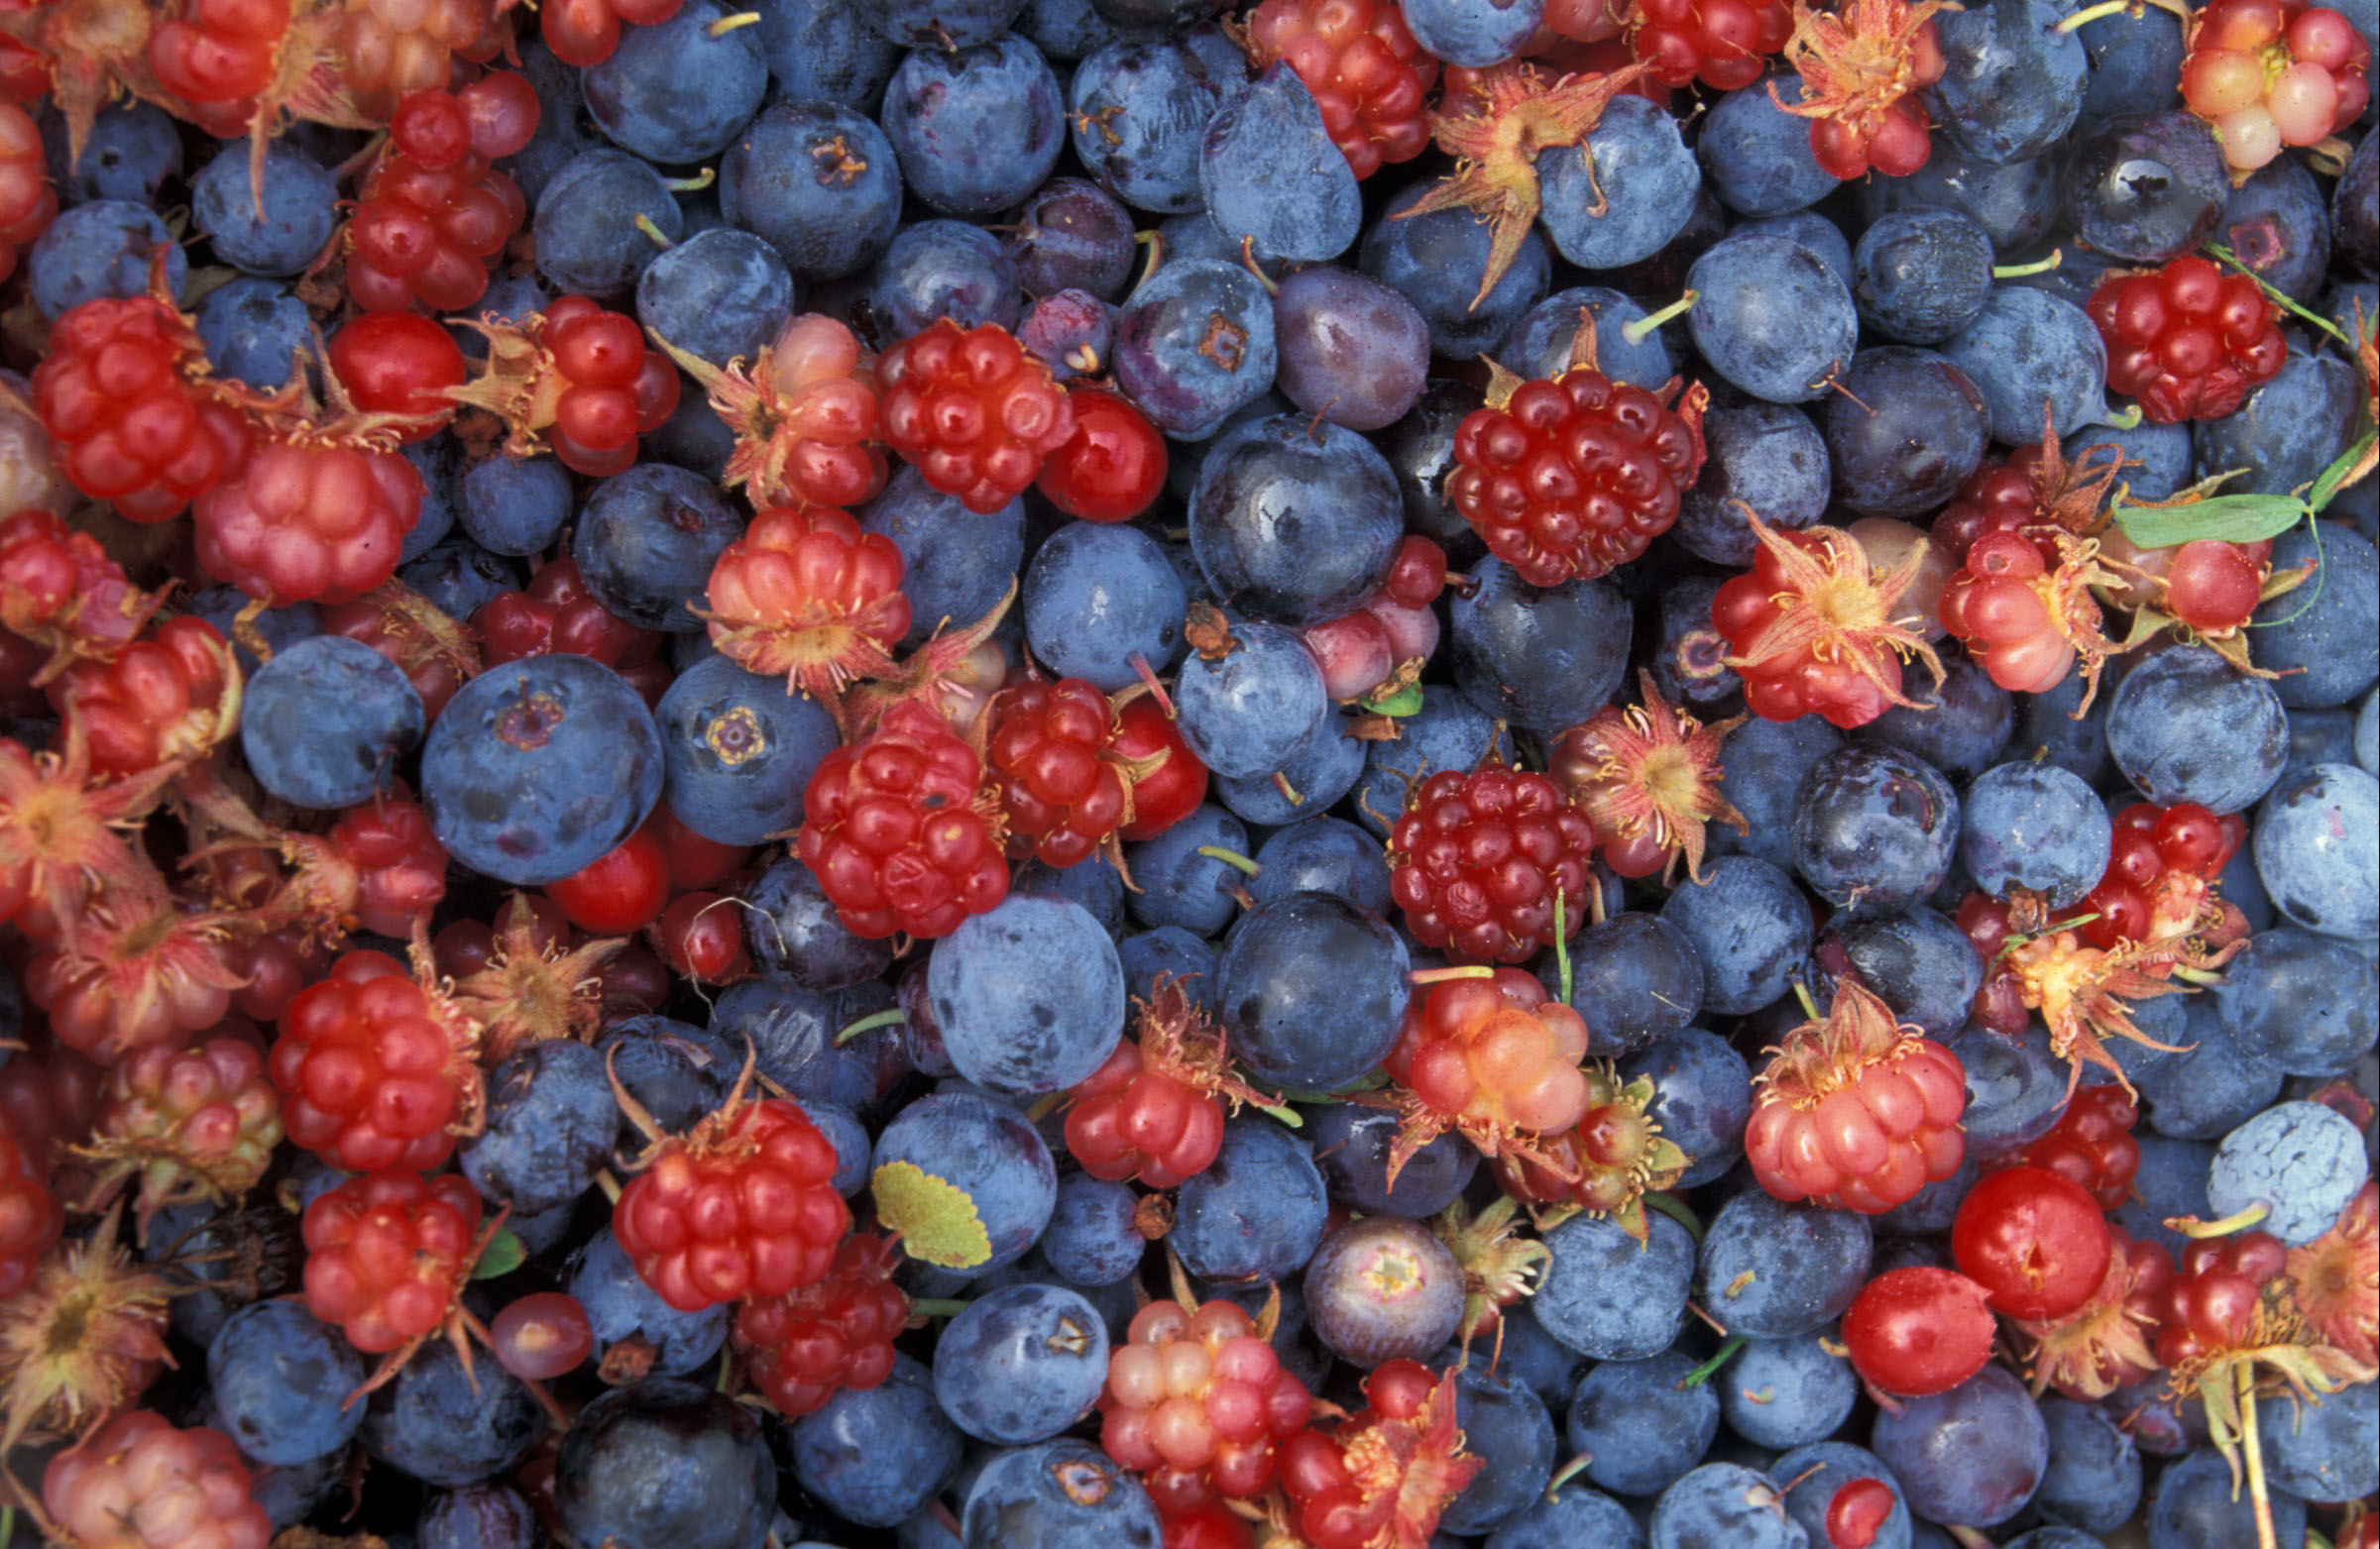 Berry HD Wallpaper by U.S. Fish and Wildlife Service